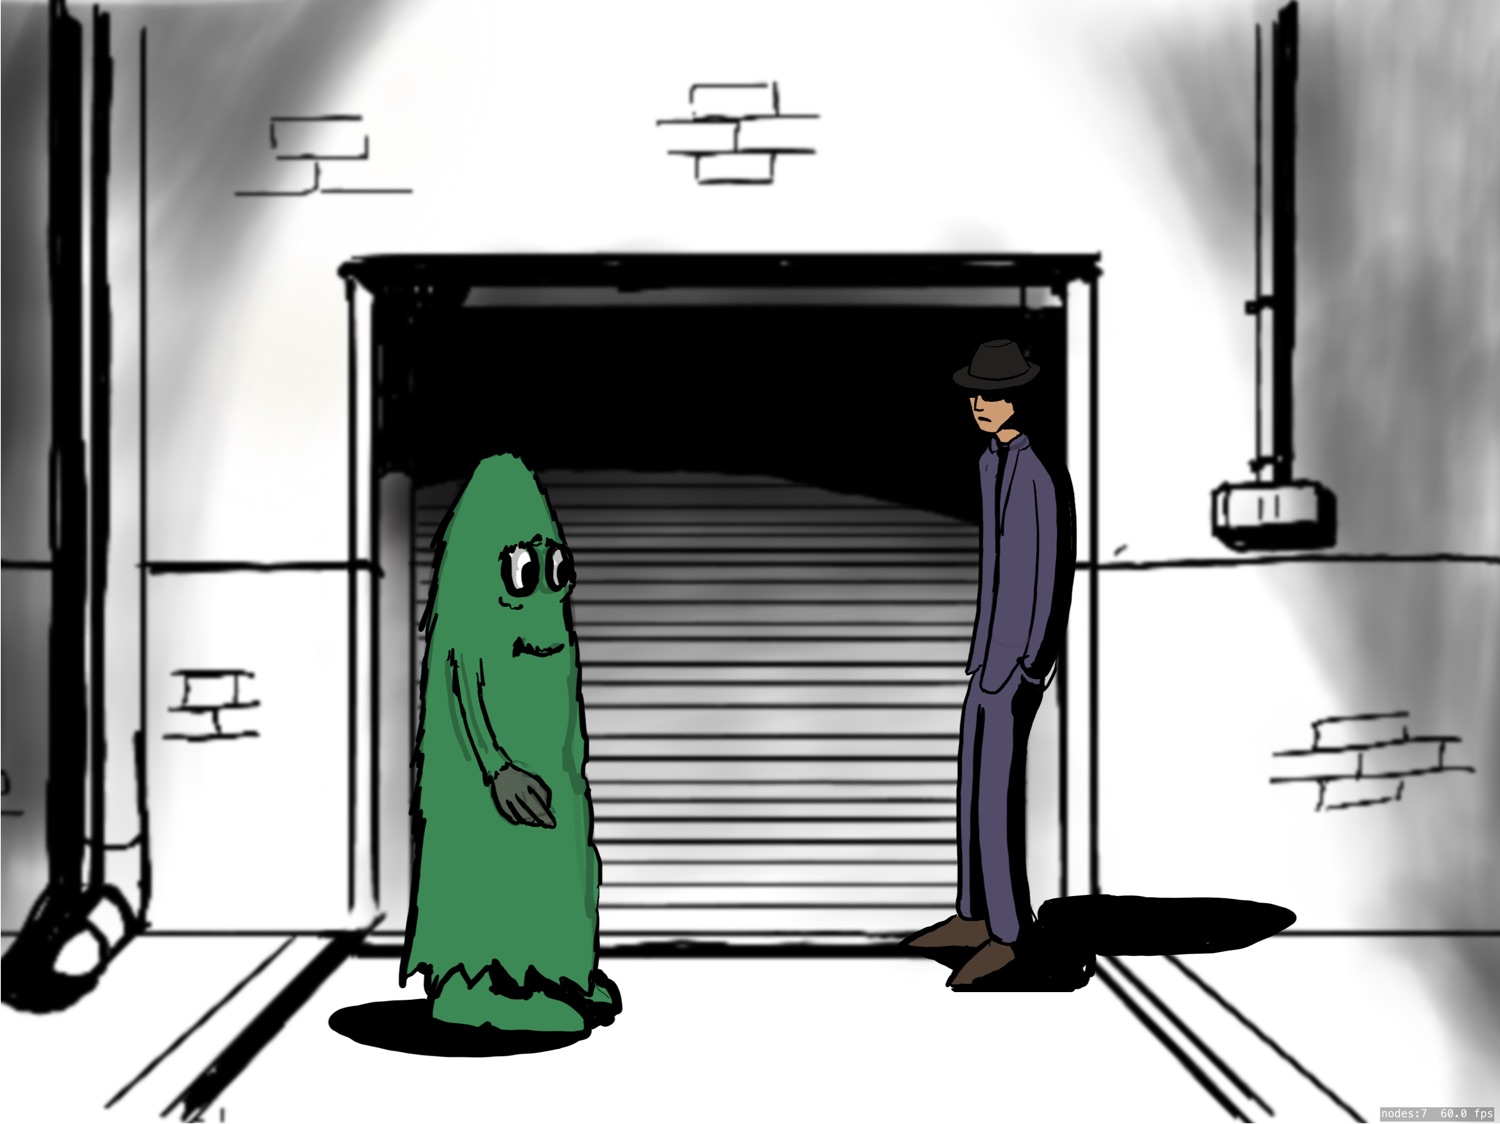 Another screenshot of a 2D Adventure game scene, where a green fuzzy monster is meeting a sinister man in a back alley